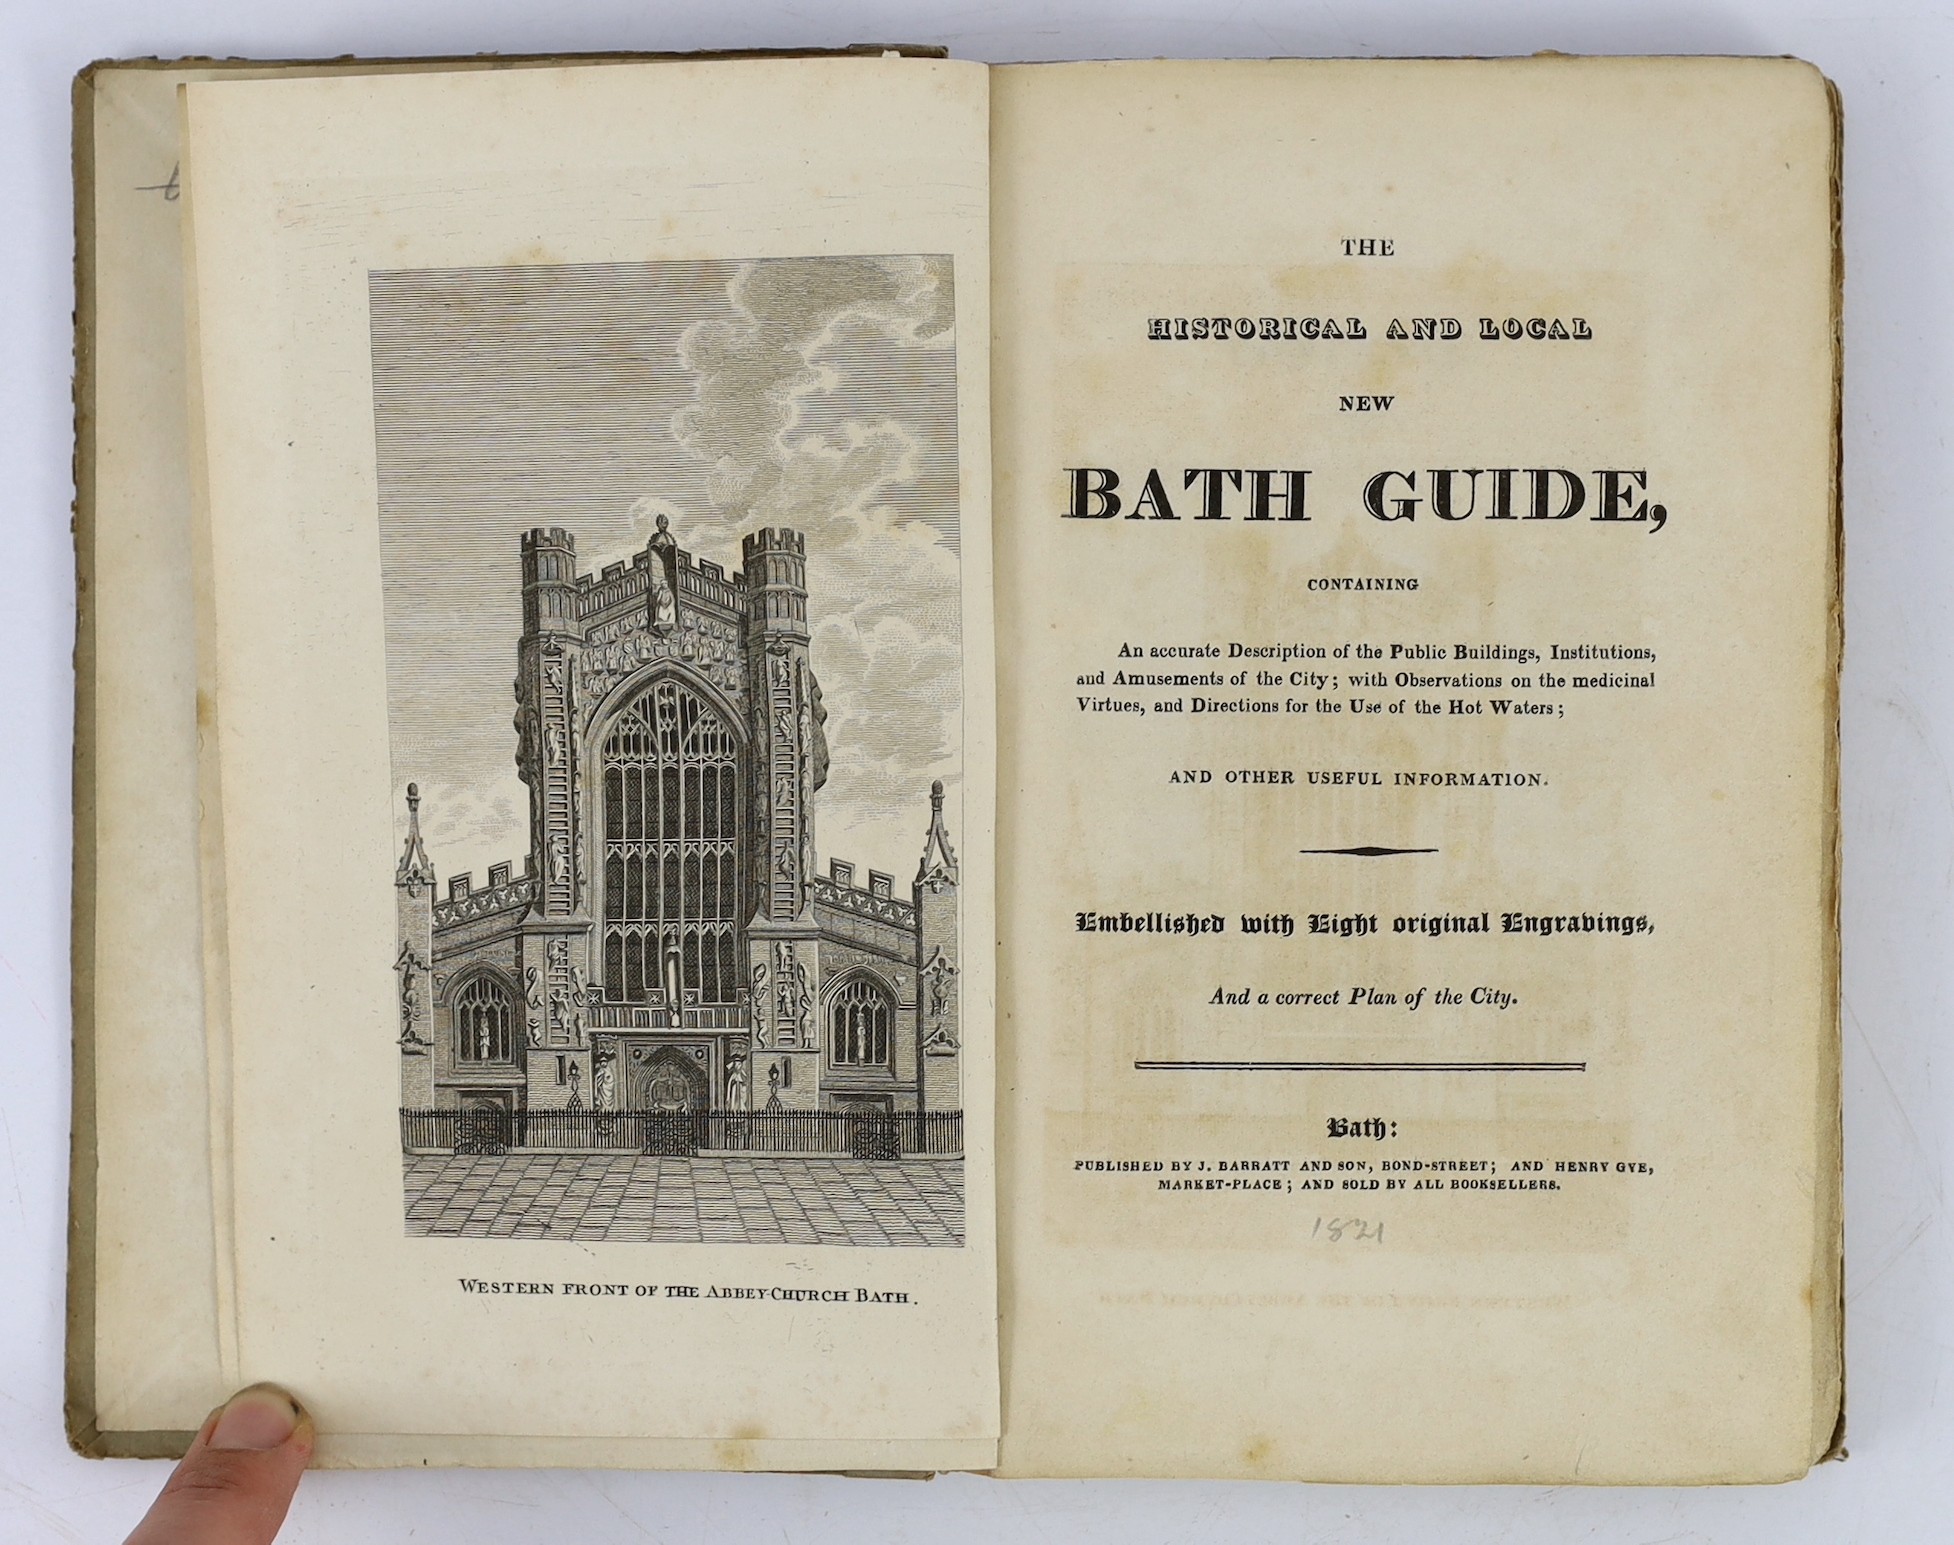 SOMERSET, BATH: The Historical and Local New Bath Guide...with Observations on the Medicinal Virtues, and Directions for the Use of the Bath Waters, by Sir George Smith Gibbes.....2 folded plans, 13 plates and 35 decorat